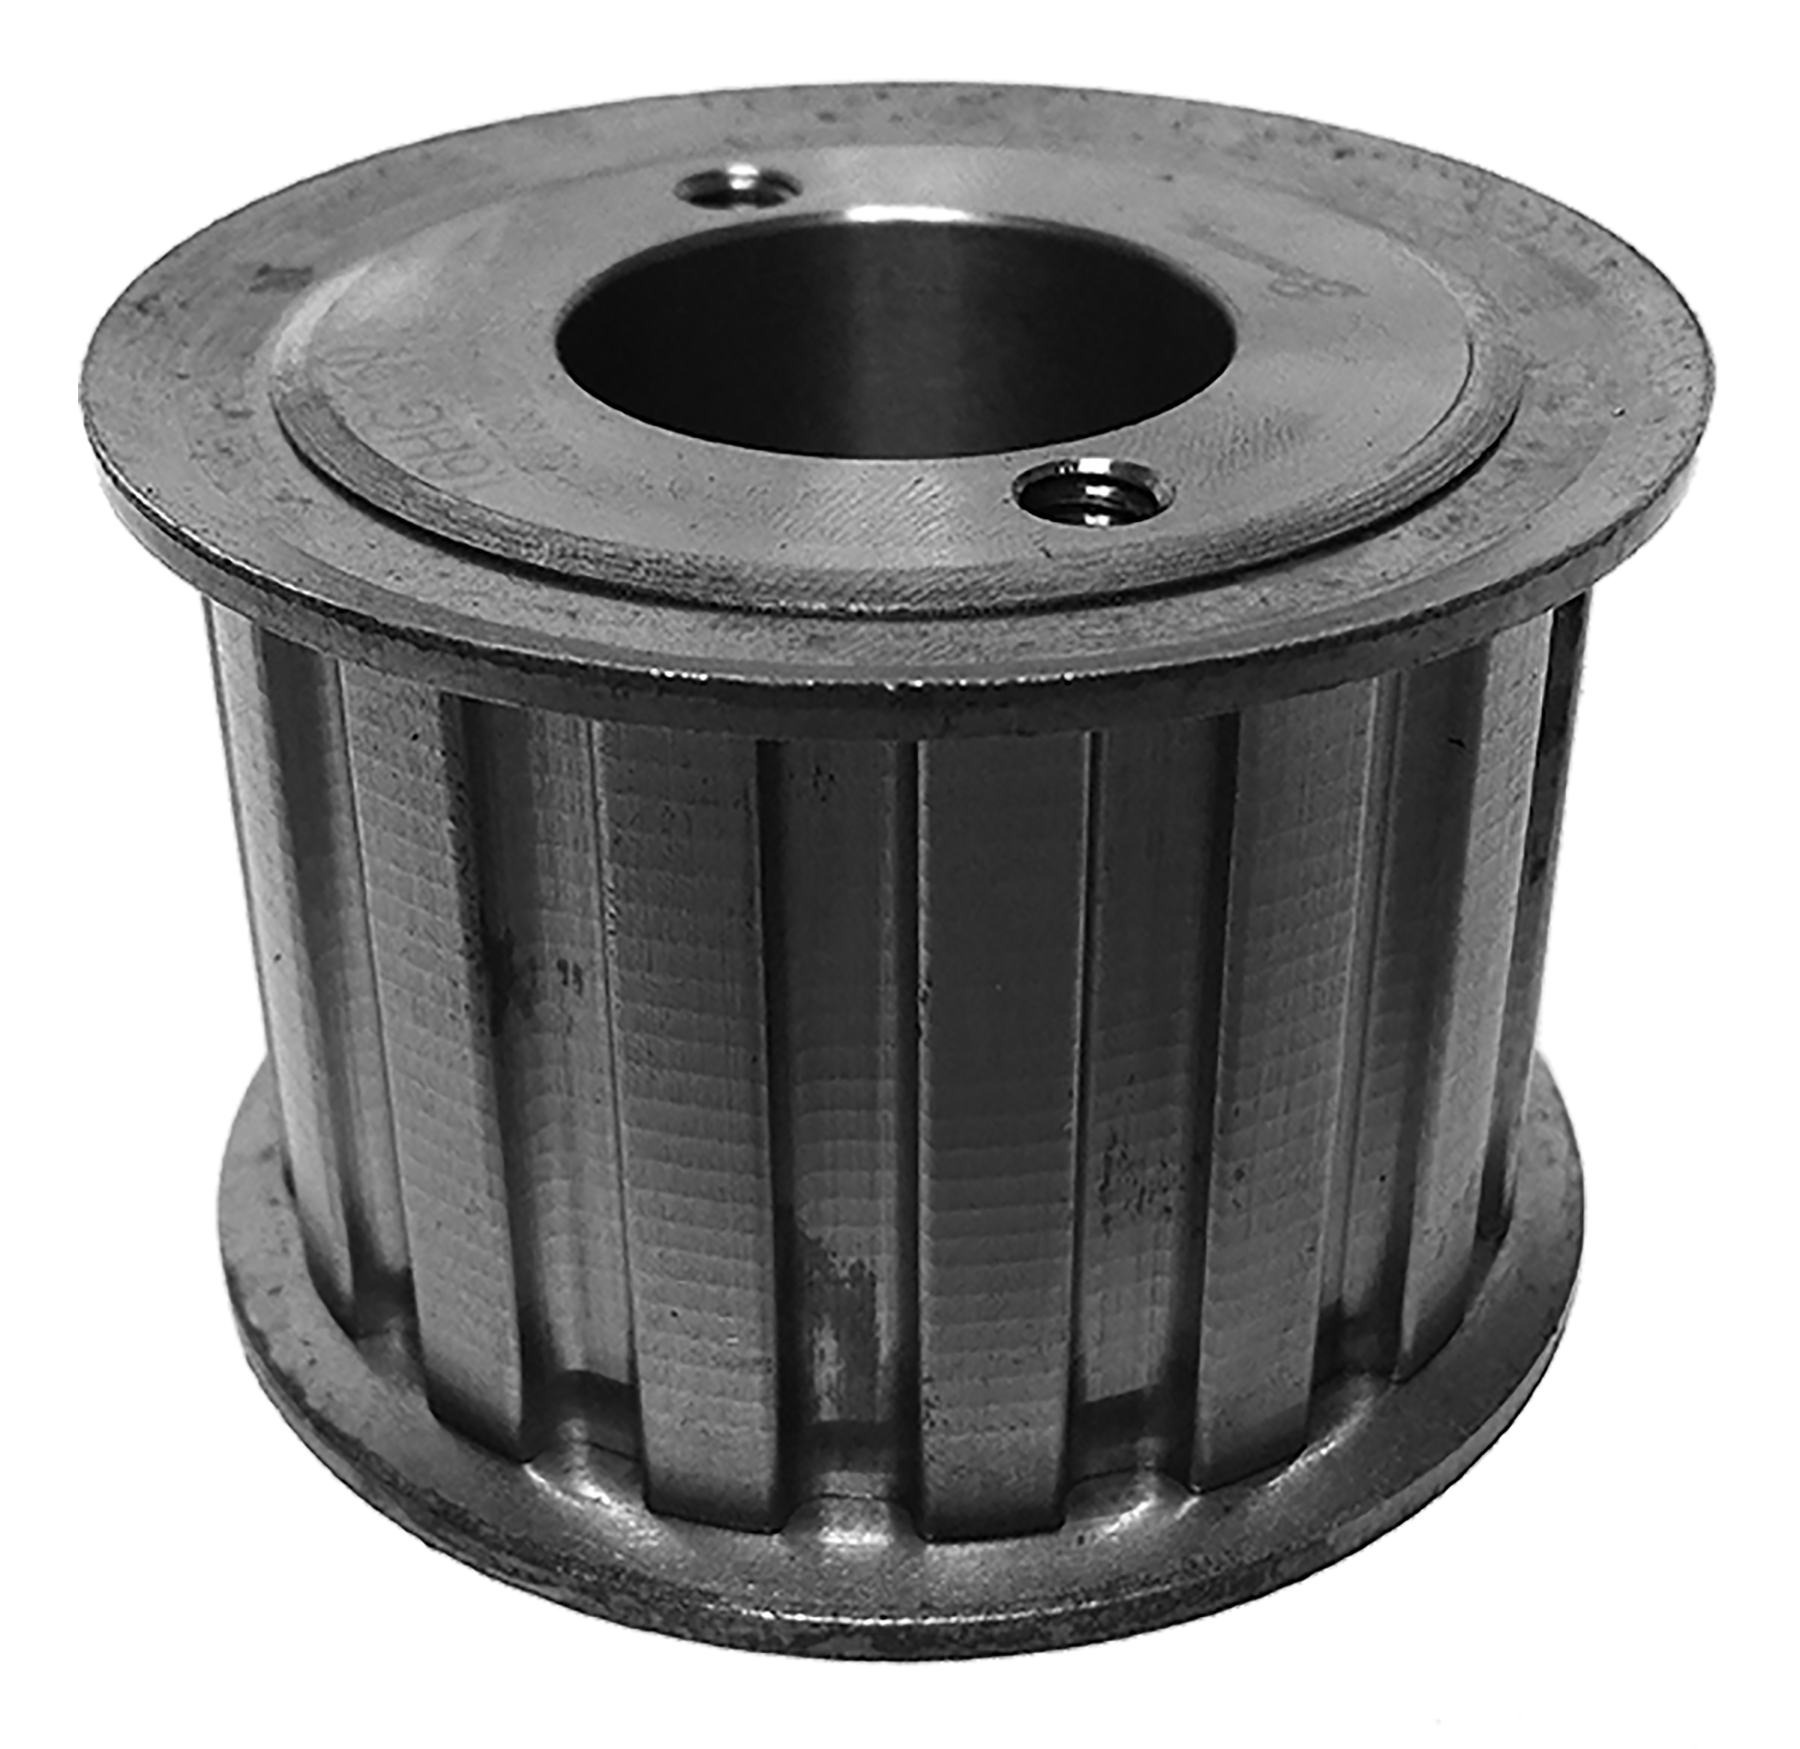 16HG150 - Steel Imperial Pitch Pulleys